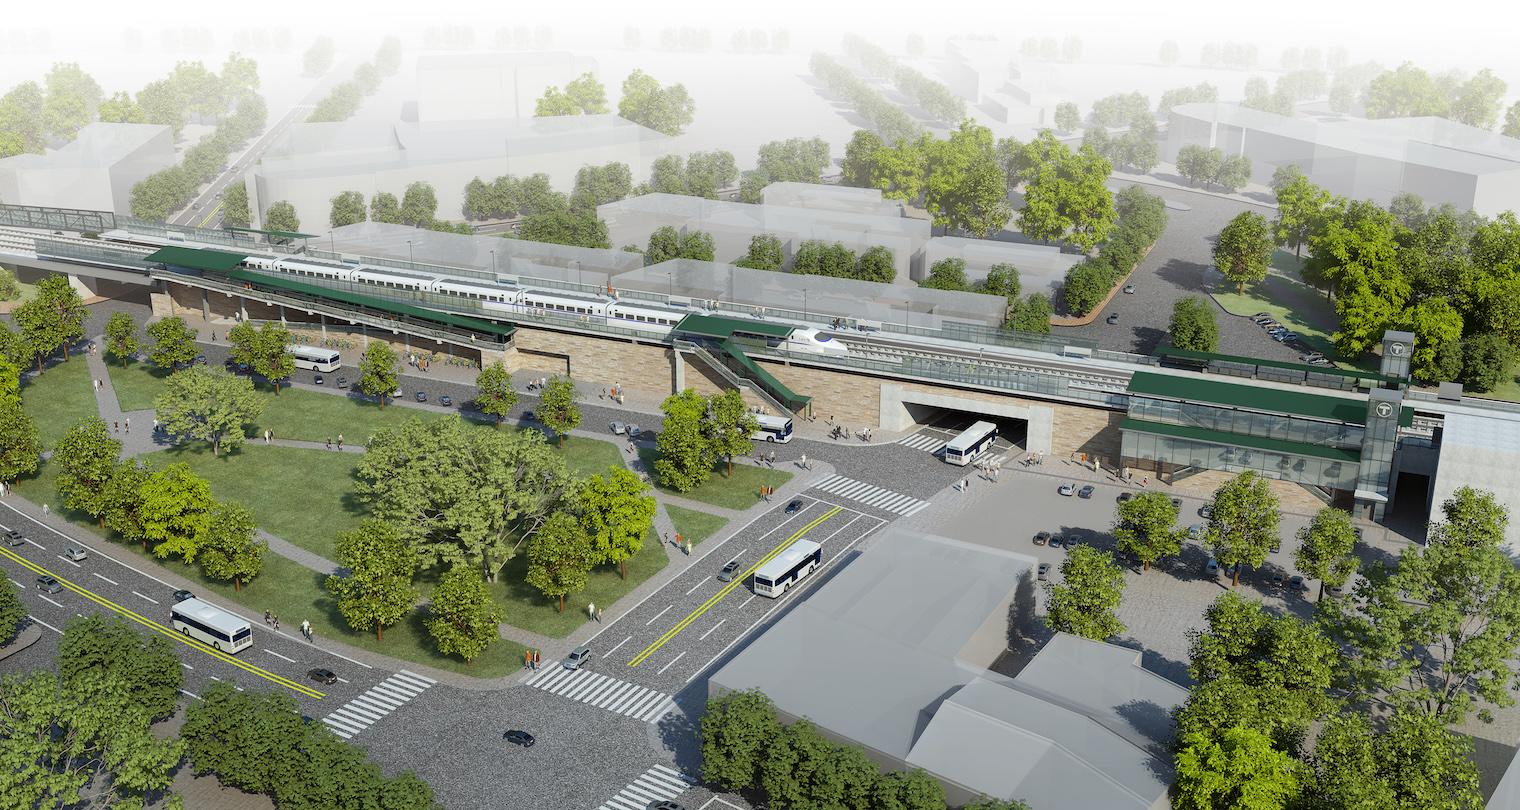 A rendering shows what Winchester Center Station will look like after accessibility improvements, as viewed from the inbound side